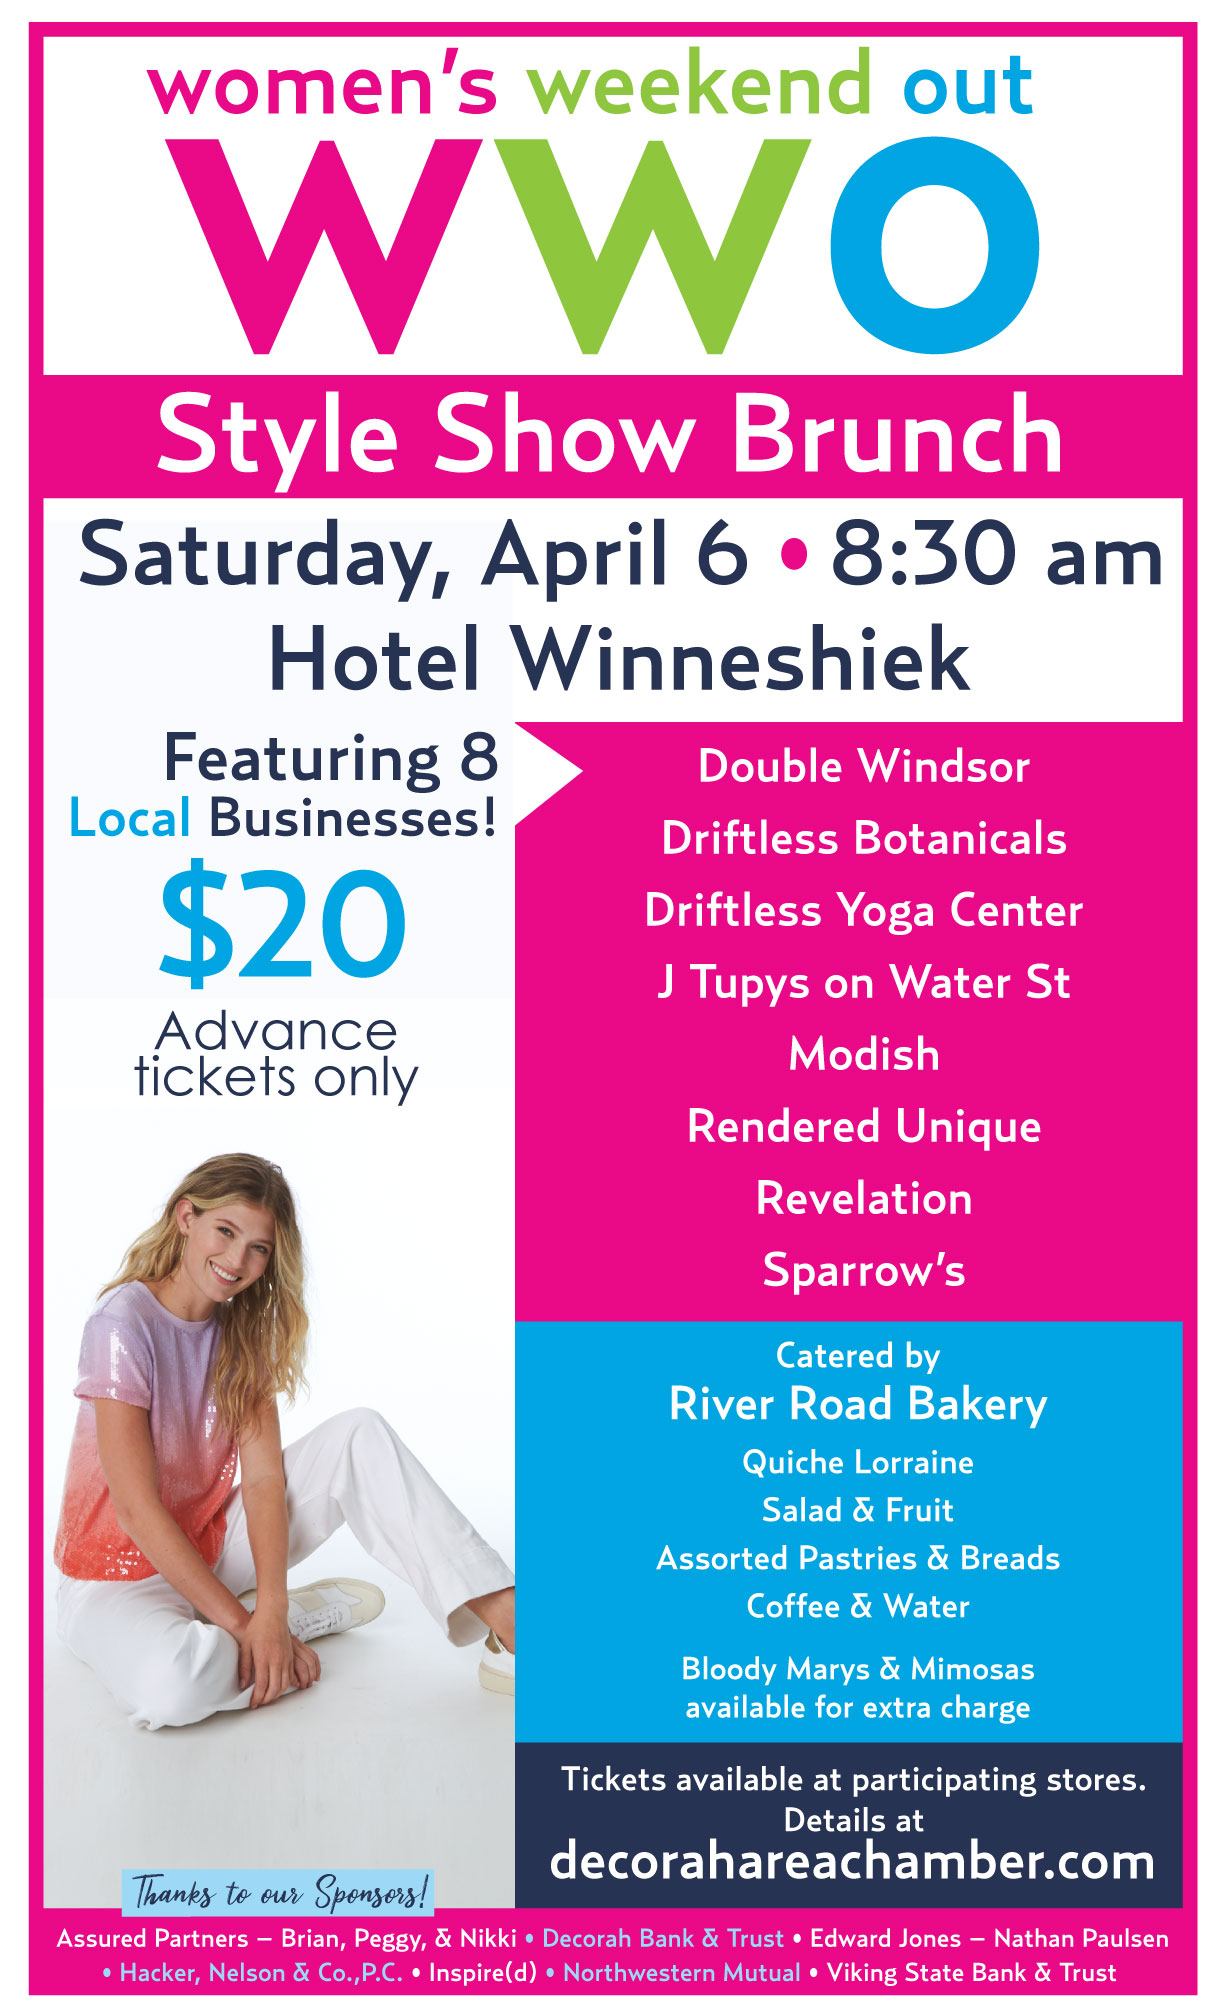 Women's Weekend Out Style Show Brunch thumbnail